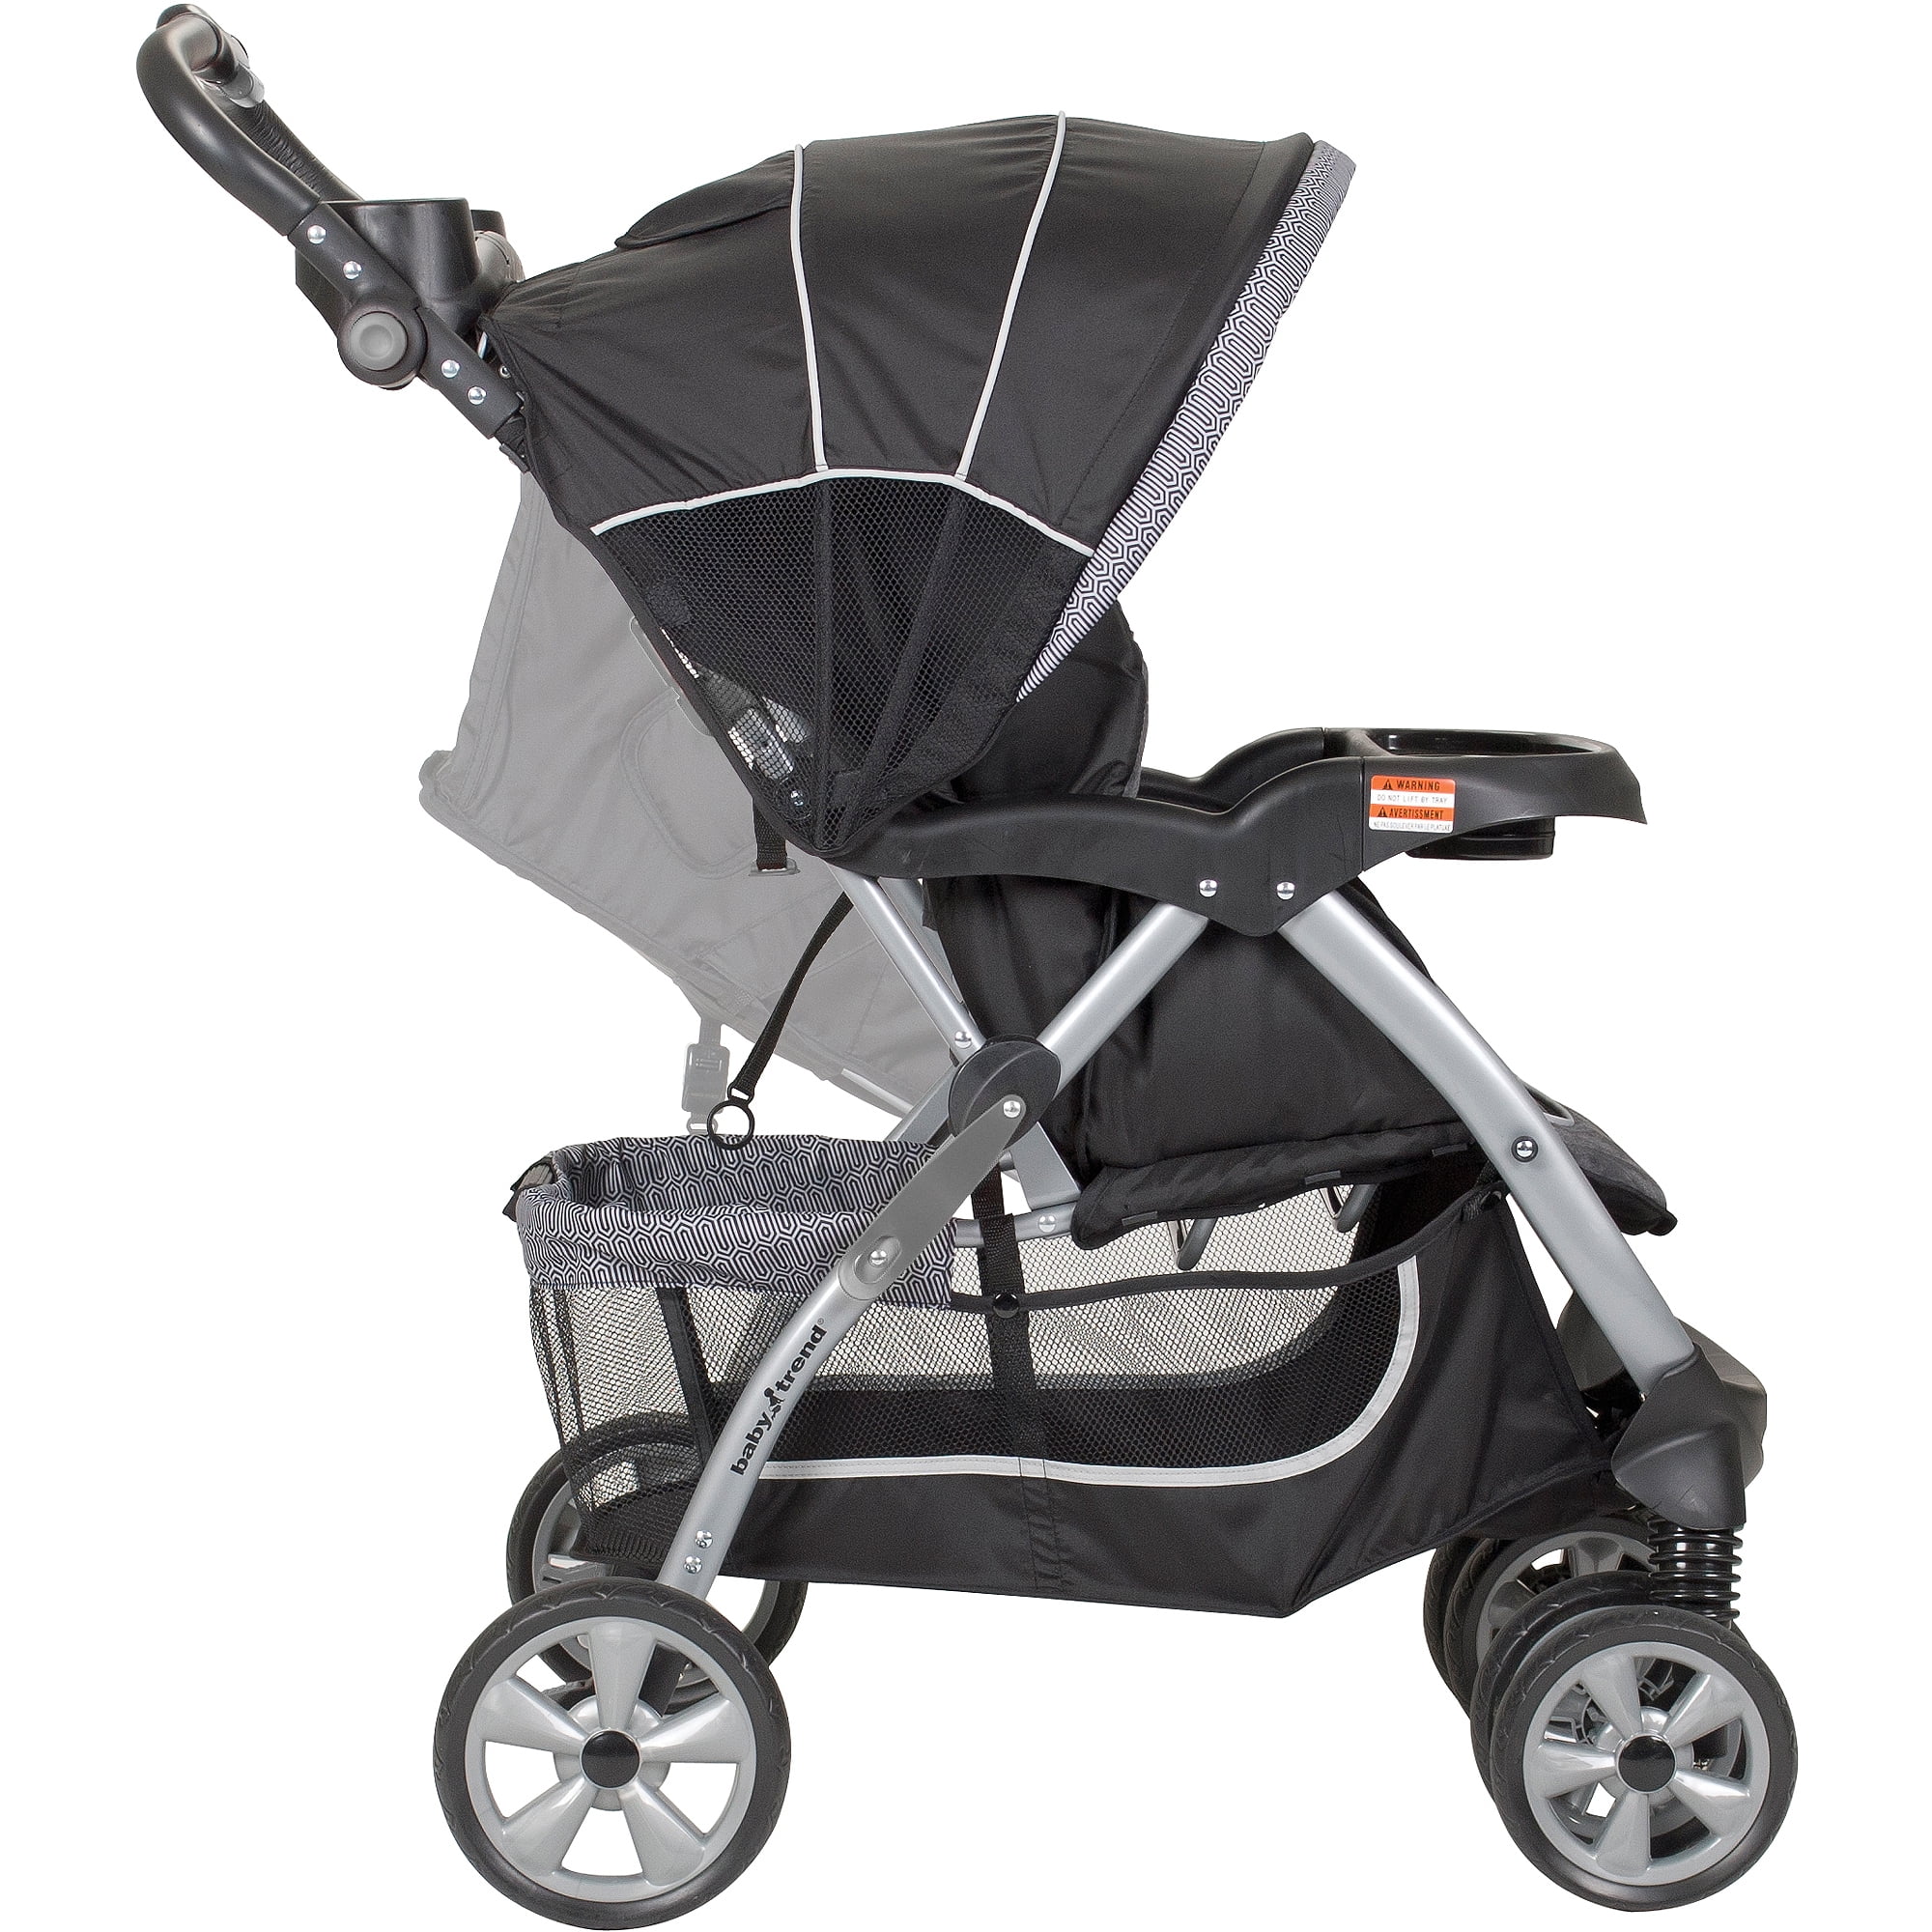 baby trend encore travel system